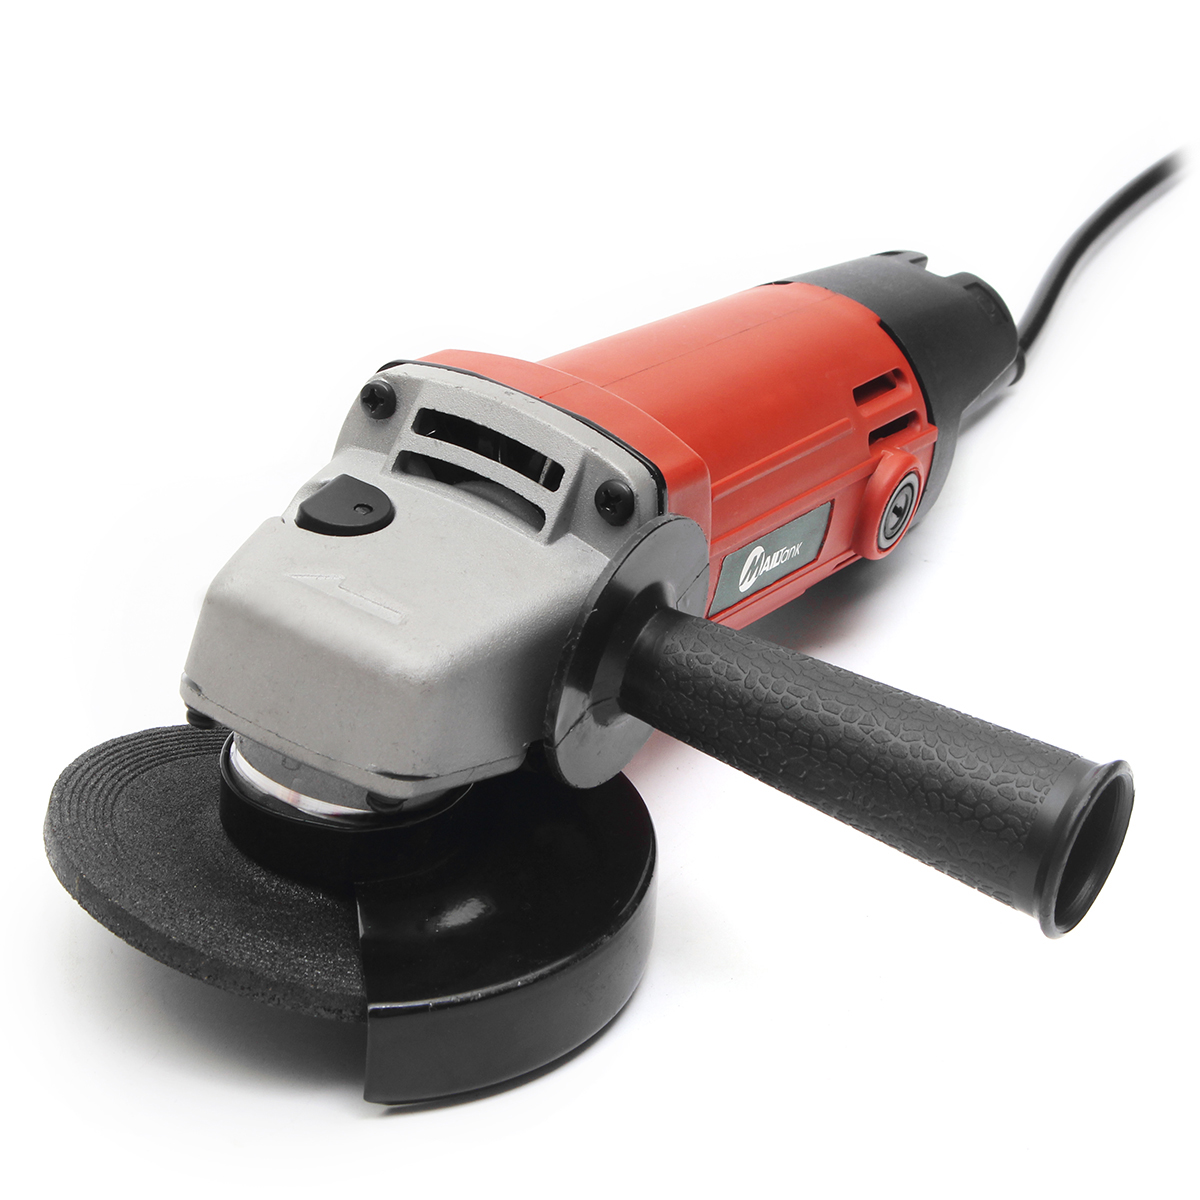 220V-600W-Multifunctional-Electric-Angle-Grinder-Polishing-Machine-Metal-Grinding-Cutter-Tool-1292095-9